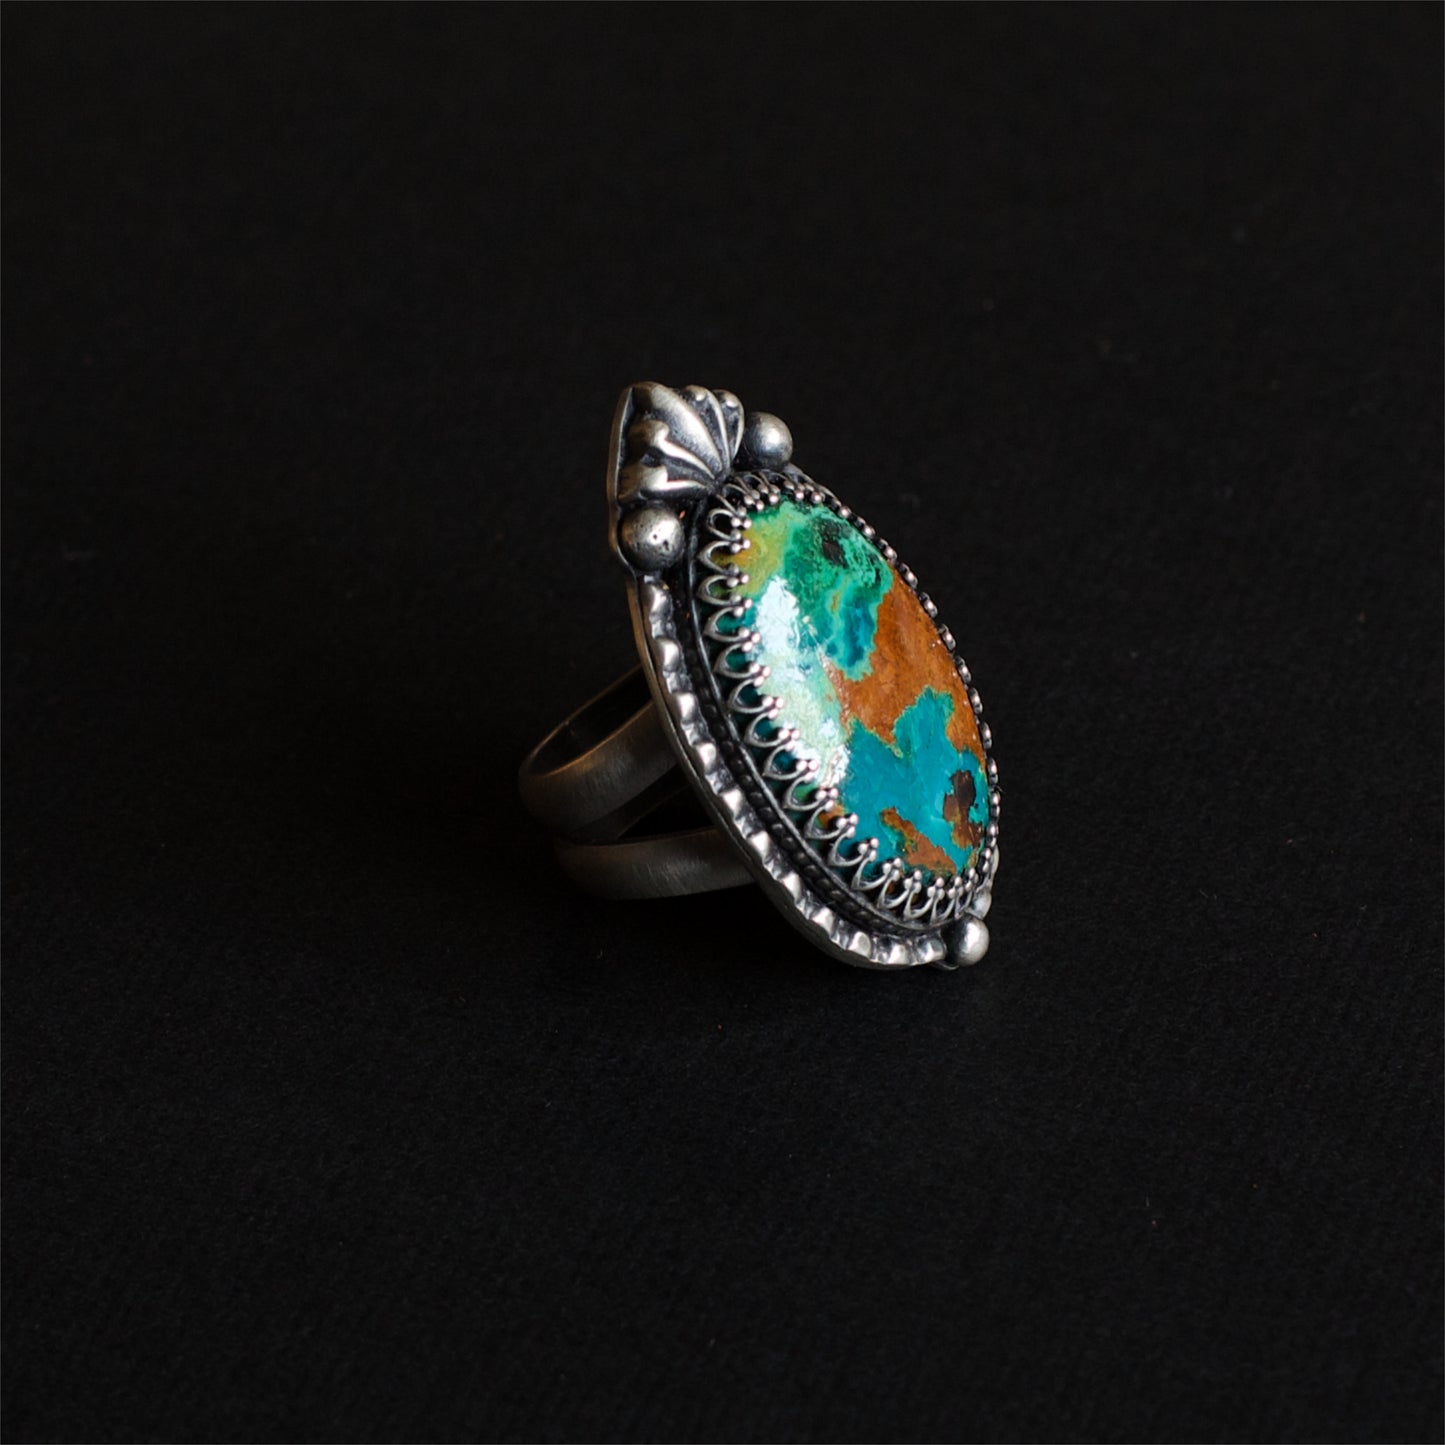 Mother Earth Chrysocolla Ring - Size: 6 3/4 or N